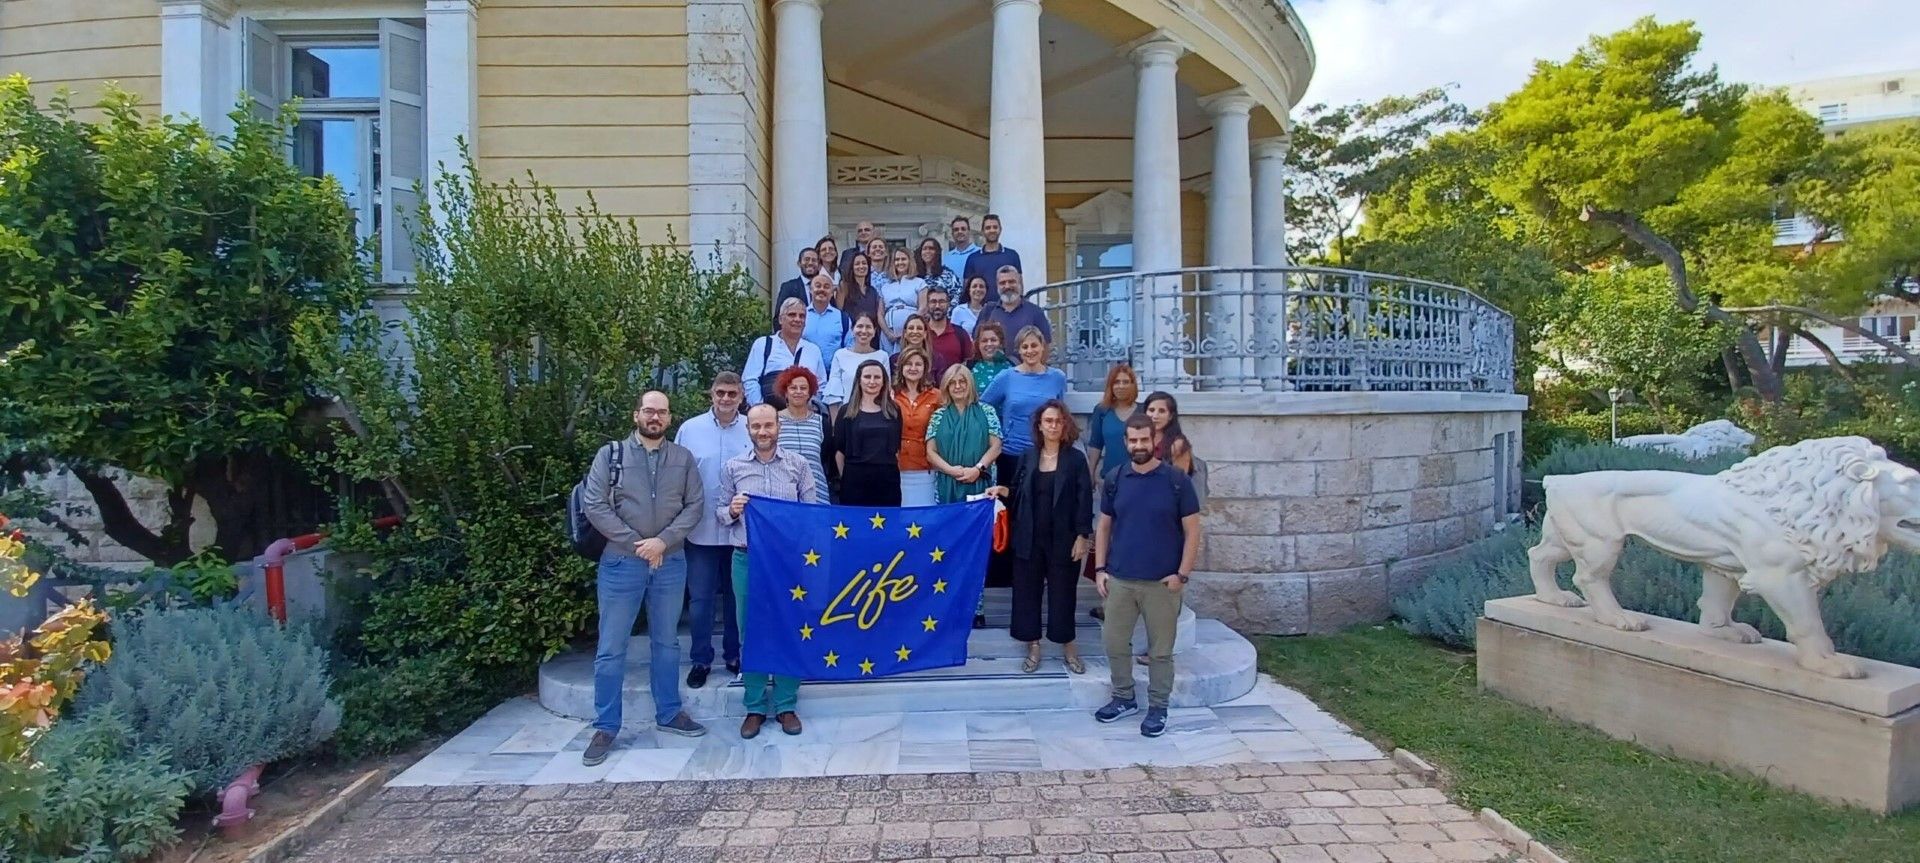 The 4th Monitoring Session of LIFE-IP CEI-Greece took place with great success.